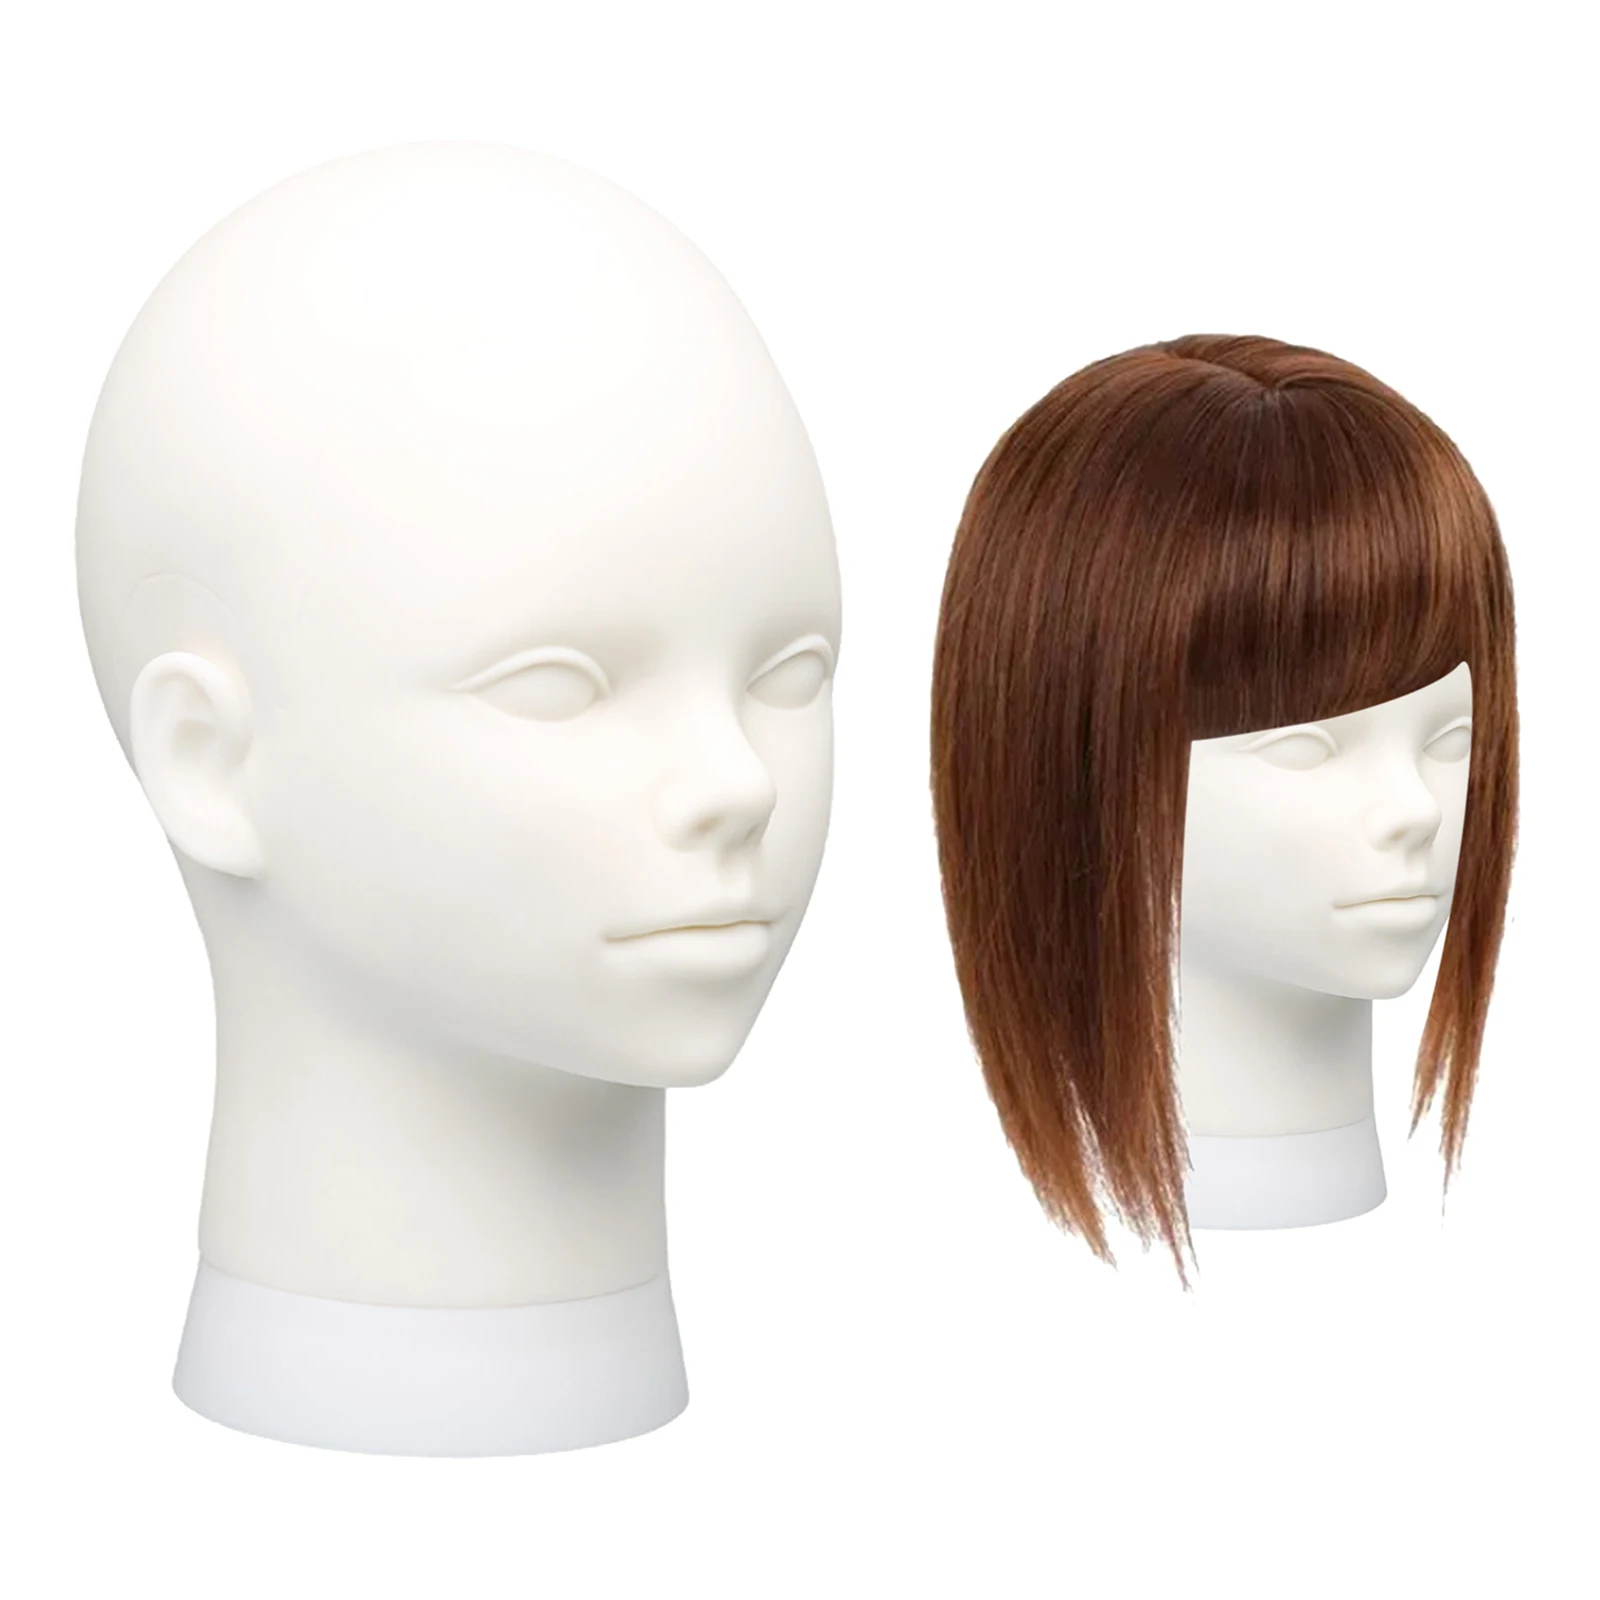 Wig Head Bald Mannequin Head Dummy Wig Stand for Wig Hairpieces Hat Glasses Display Home Travel Cosmetology Practice Training